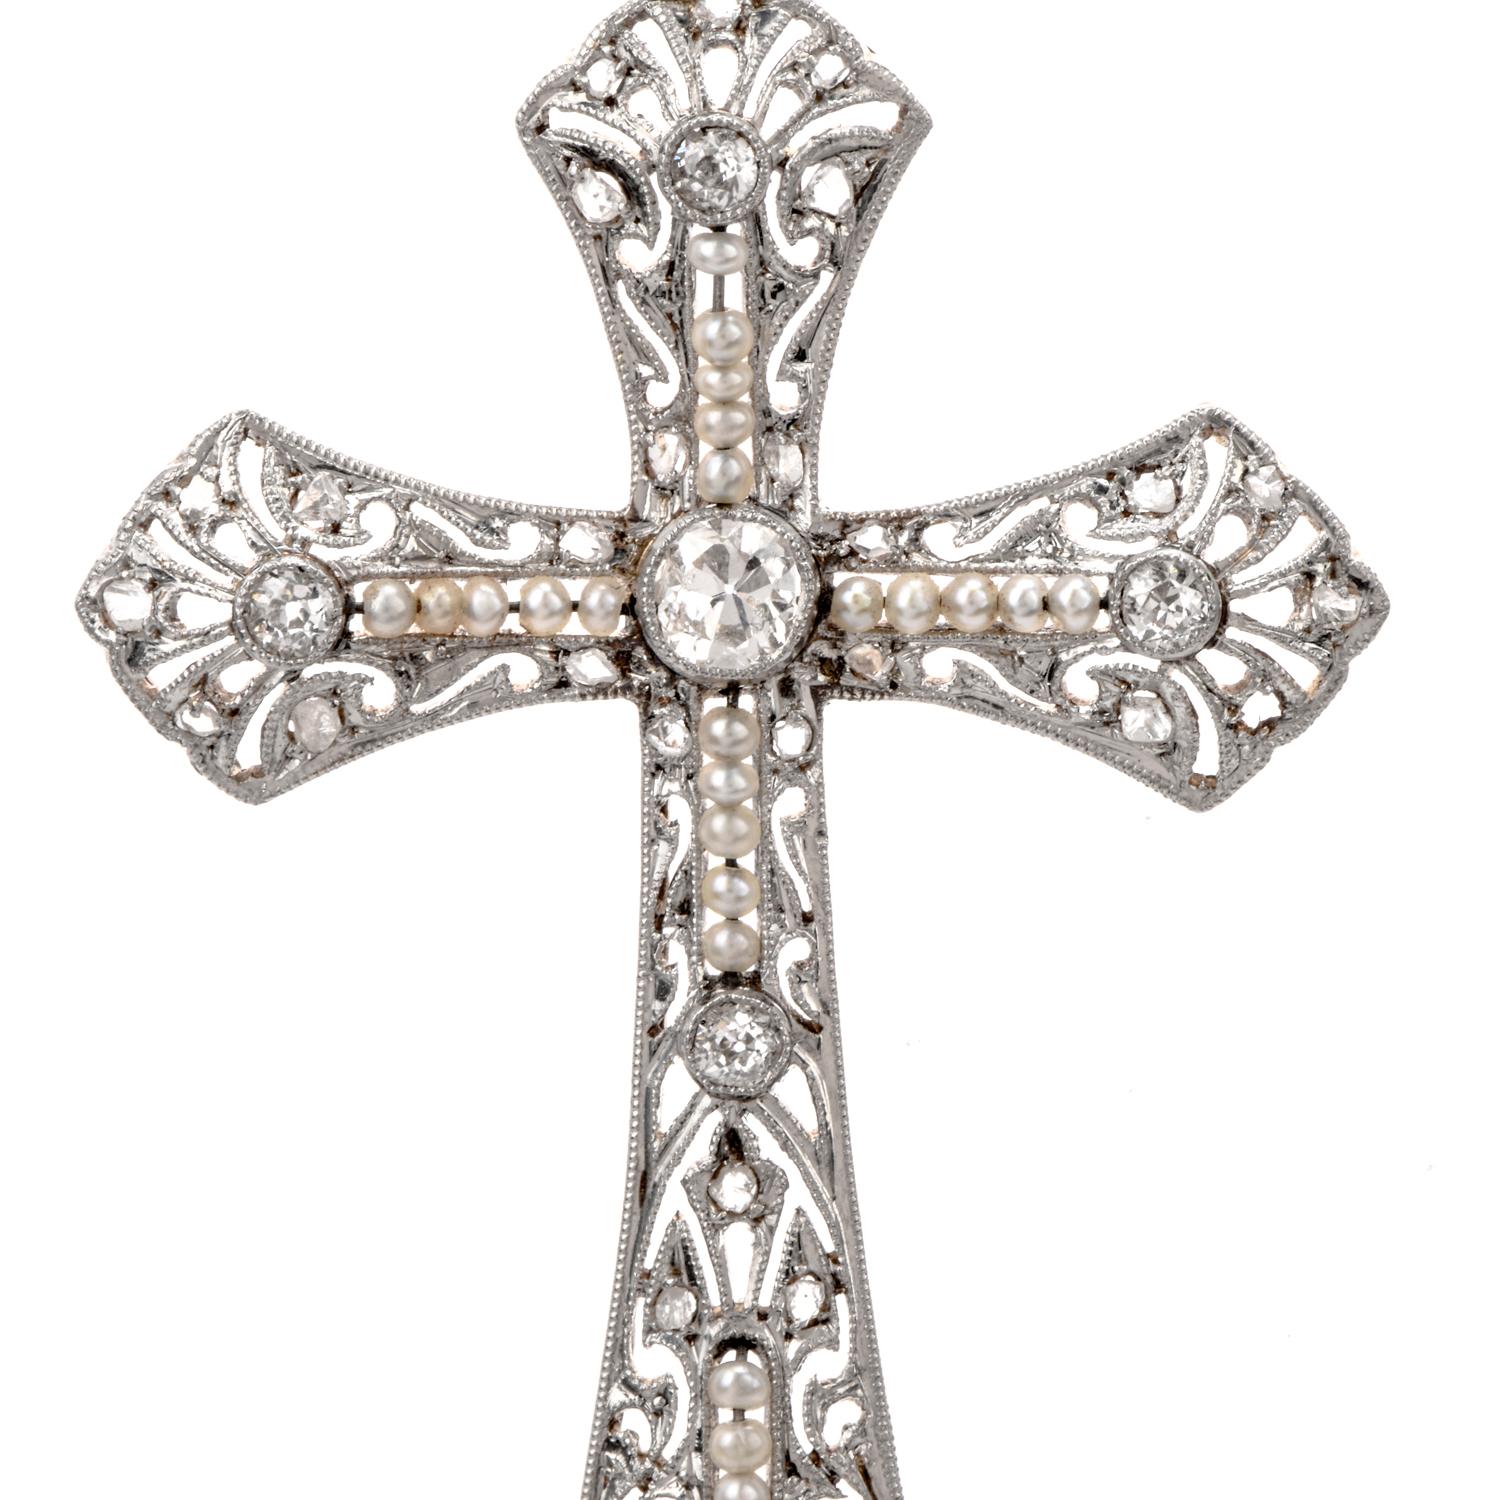 Antique 1930's  Diamond and Pearl  pendant were inspired in a Cross design and crafted in 18K Gold and solid platinum top.

Diamonds anchor the span of Pearls that run throughout the center of the elegantly designed Filagree work.

Diamonds weigh